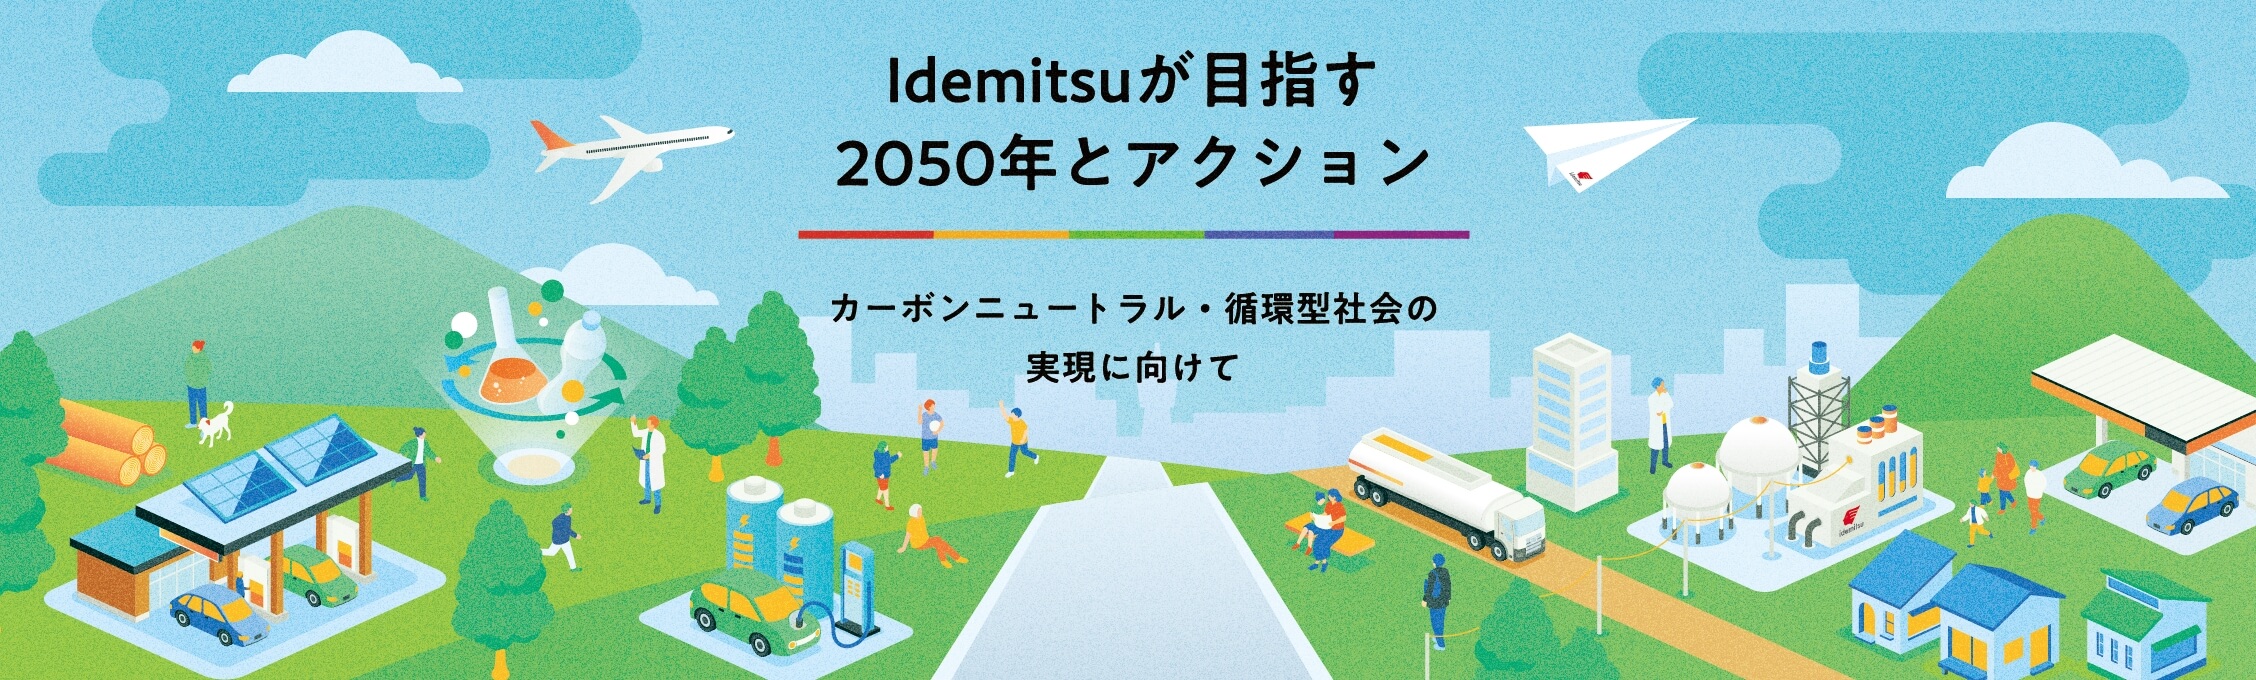 idemitsu's goals for 2050 and actions Toward the realization of a carbon-neutral and recycling-oriented society